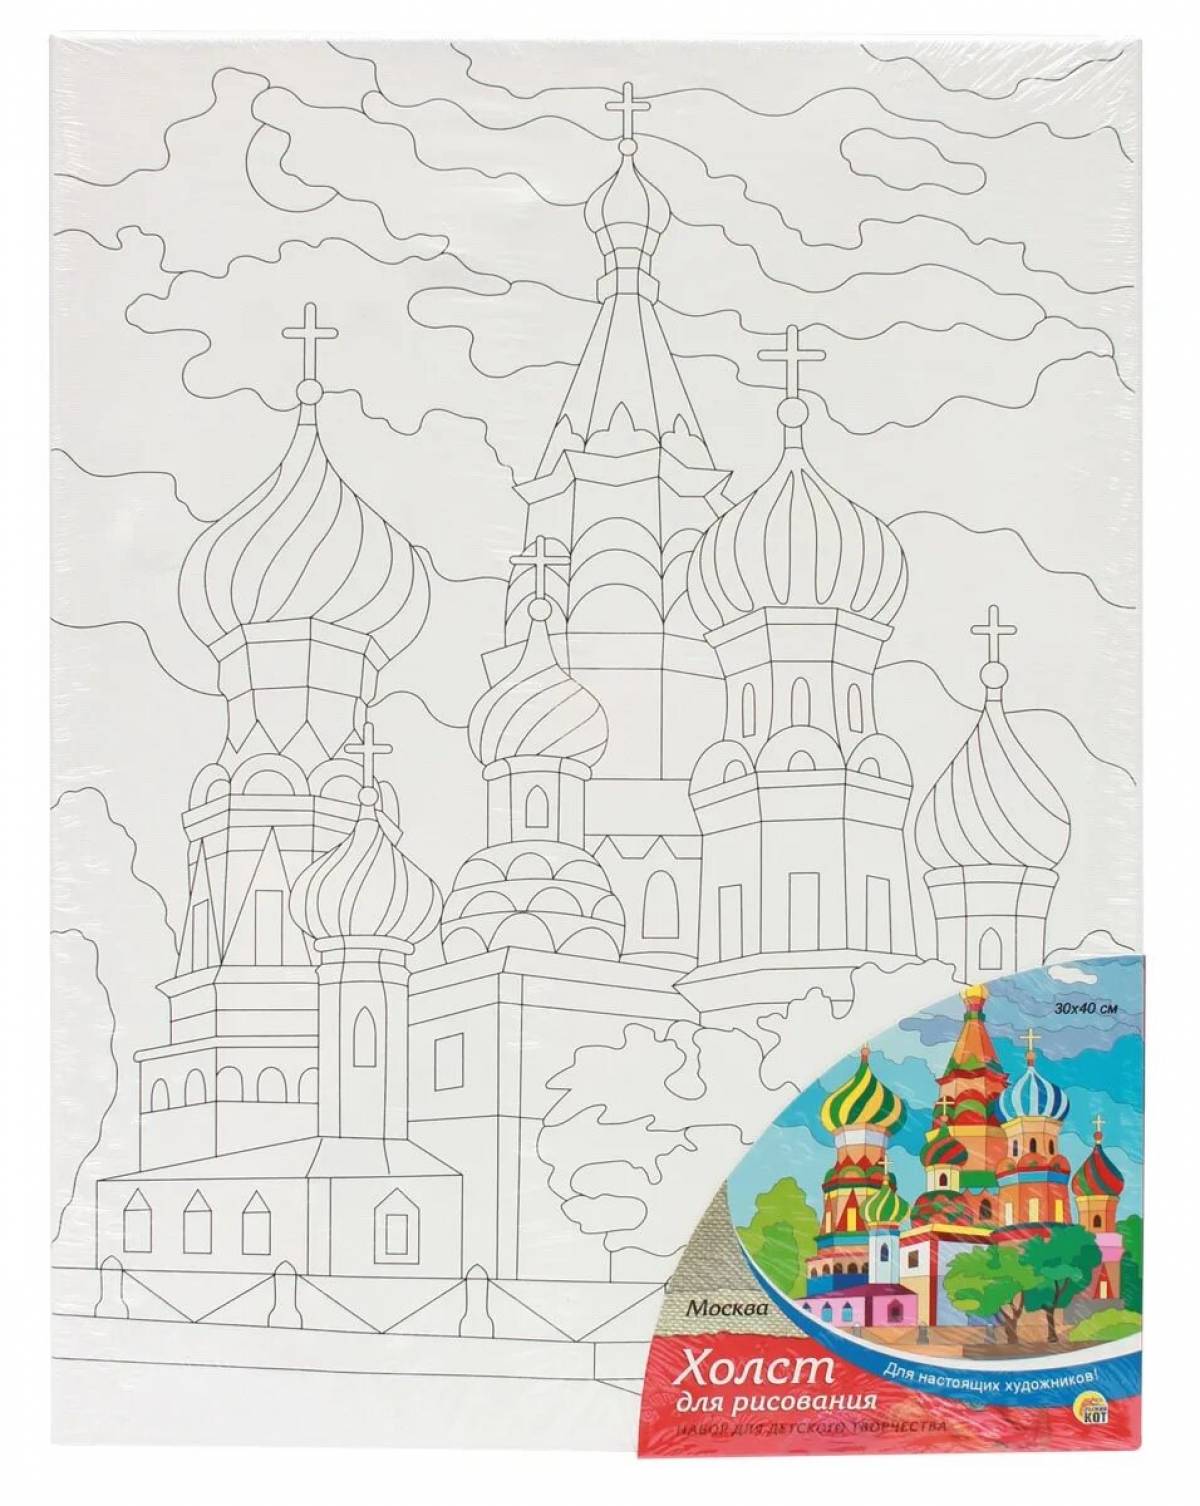 St. Basil's Cathedral for children #9